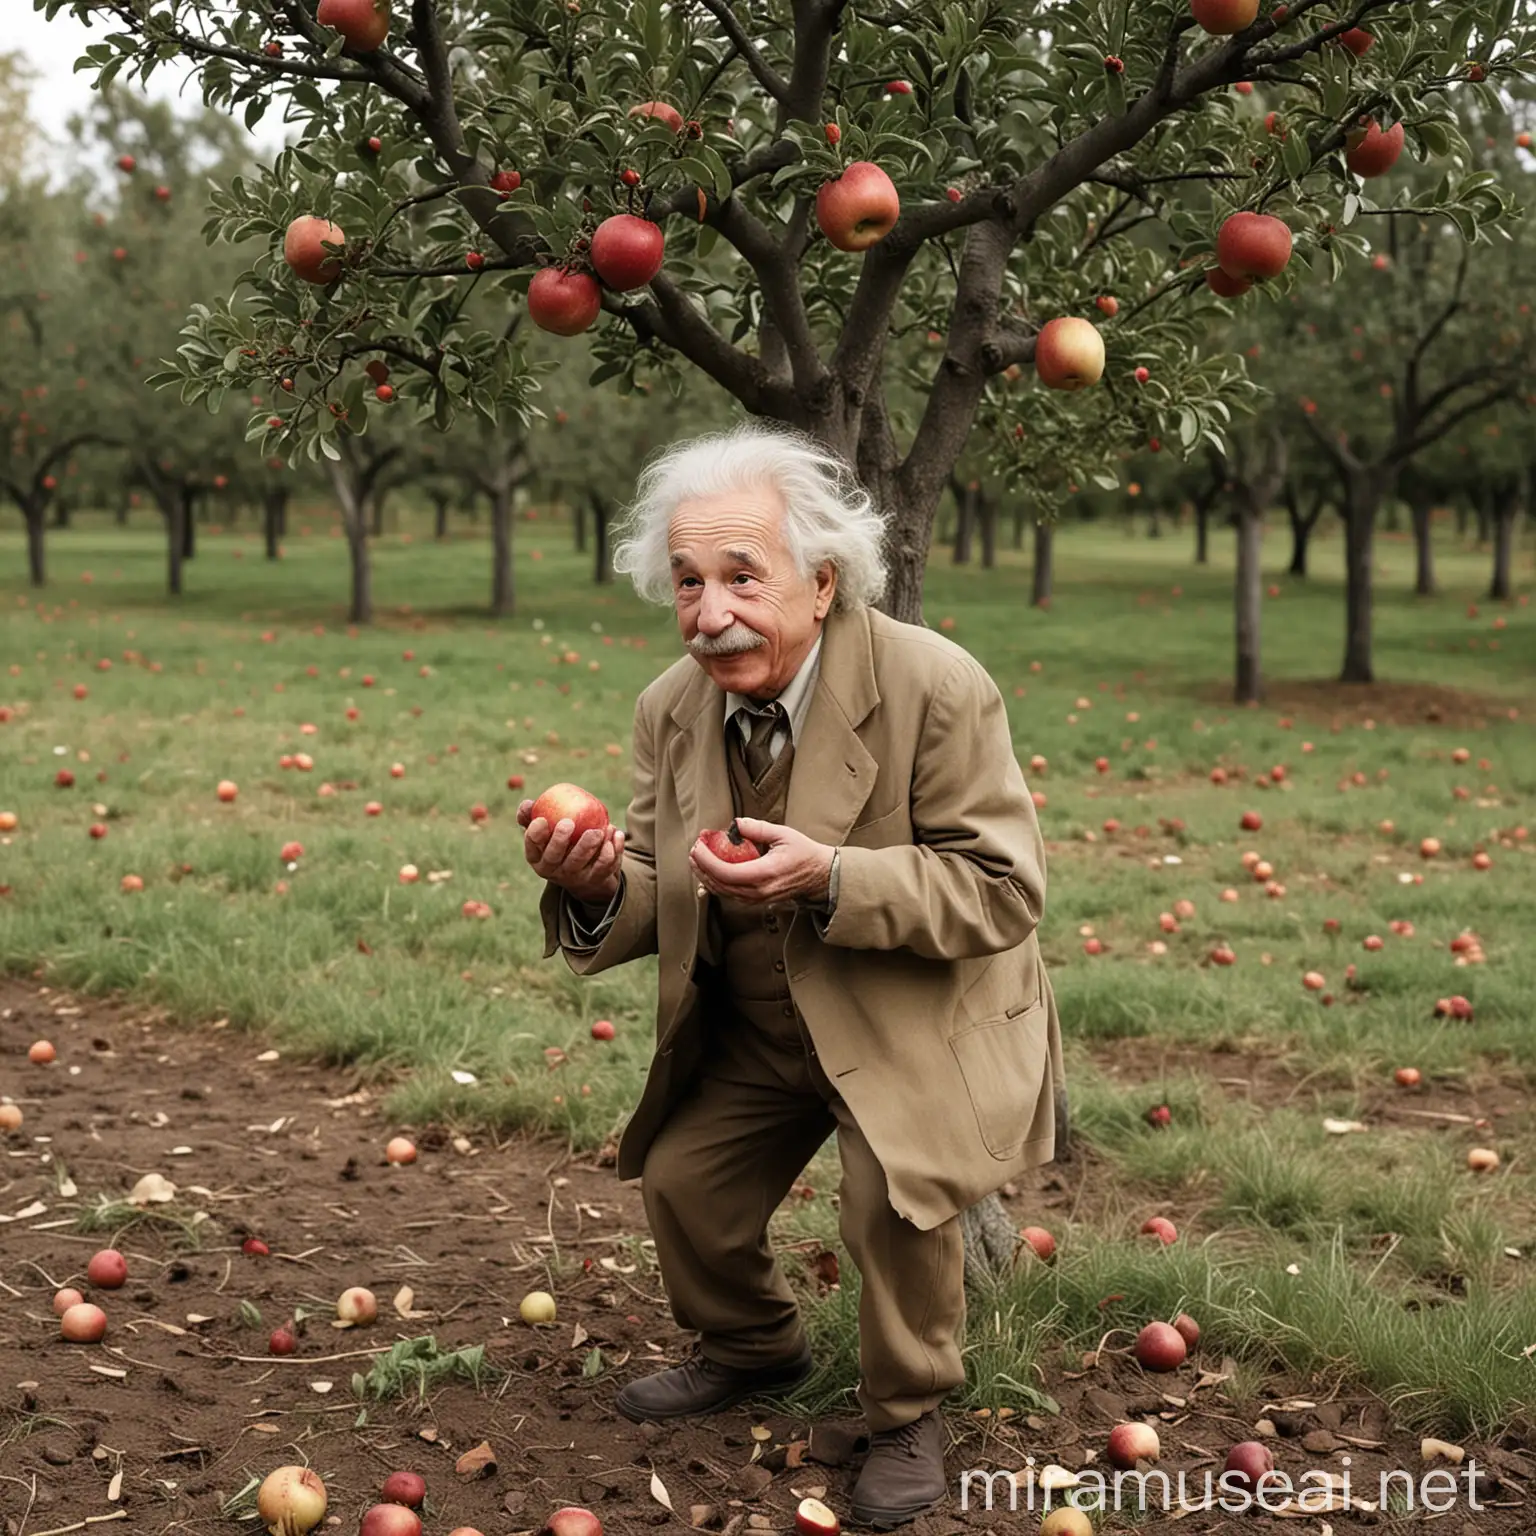 An apple fell from the tree on Einstein